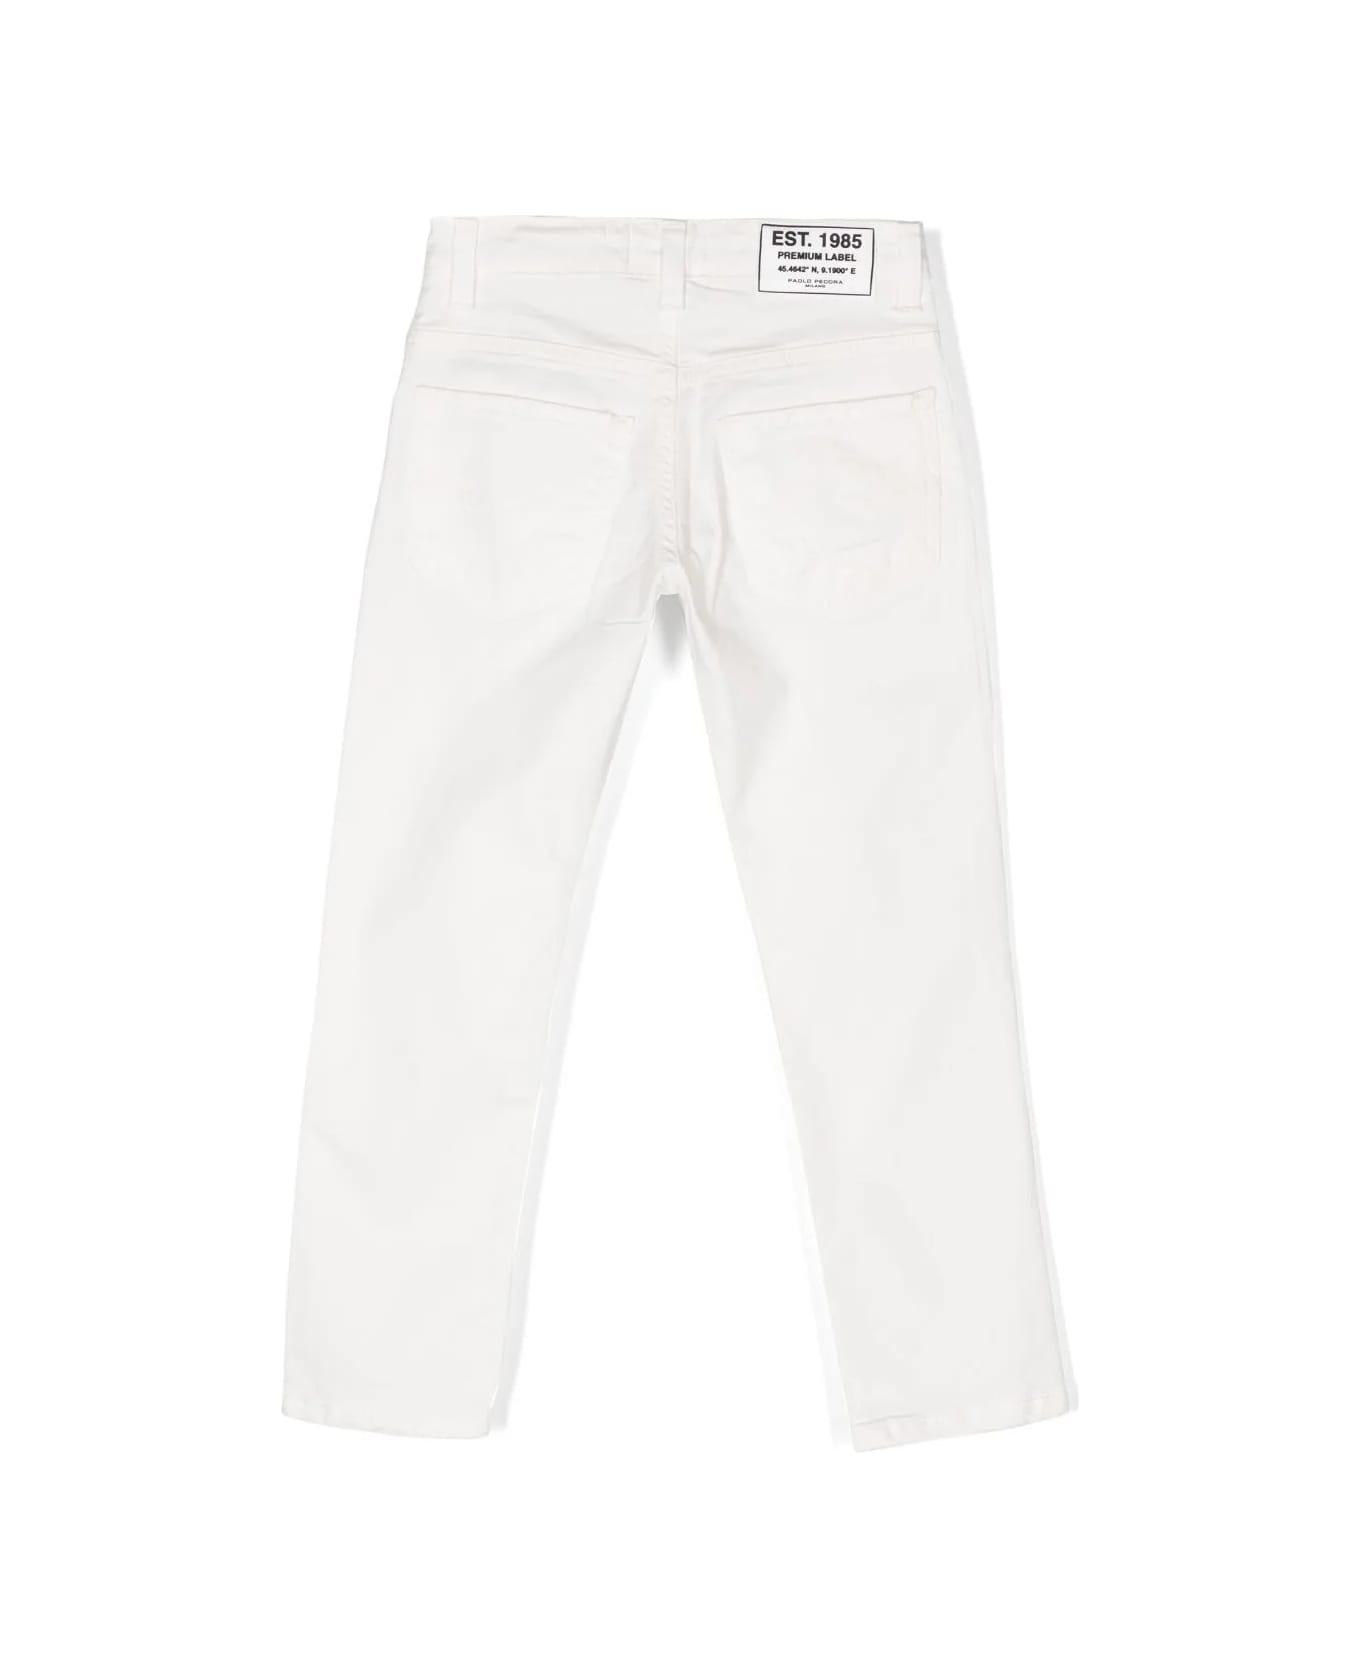 Paolo Pecora Jeans With Application - White